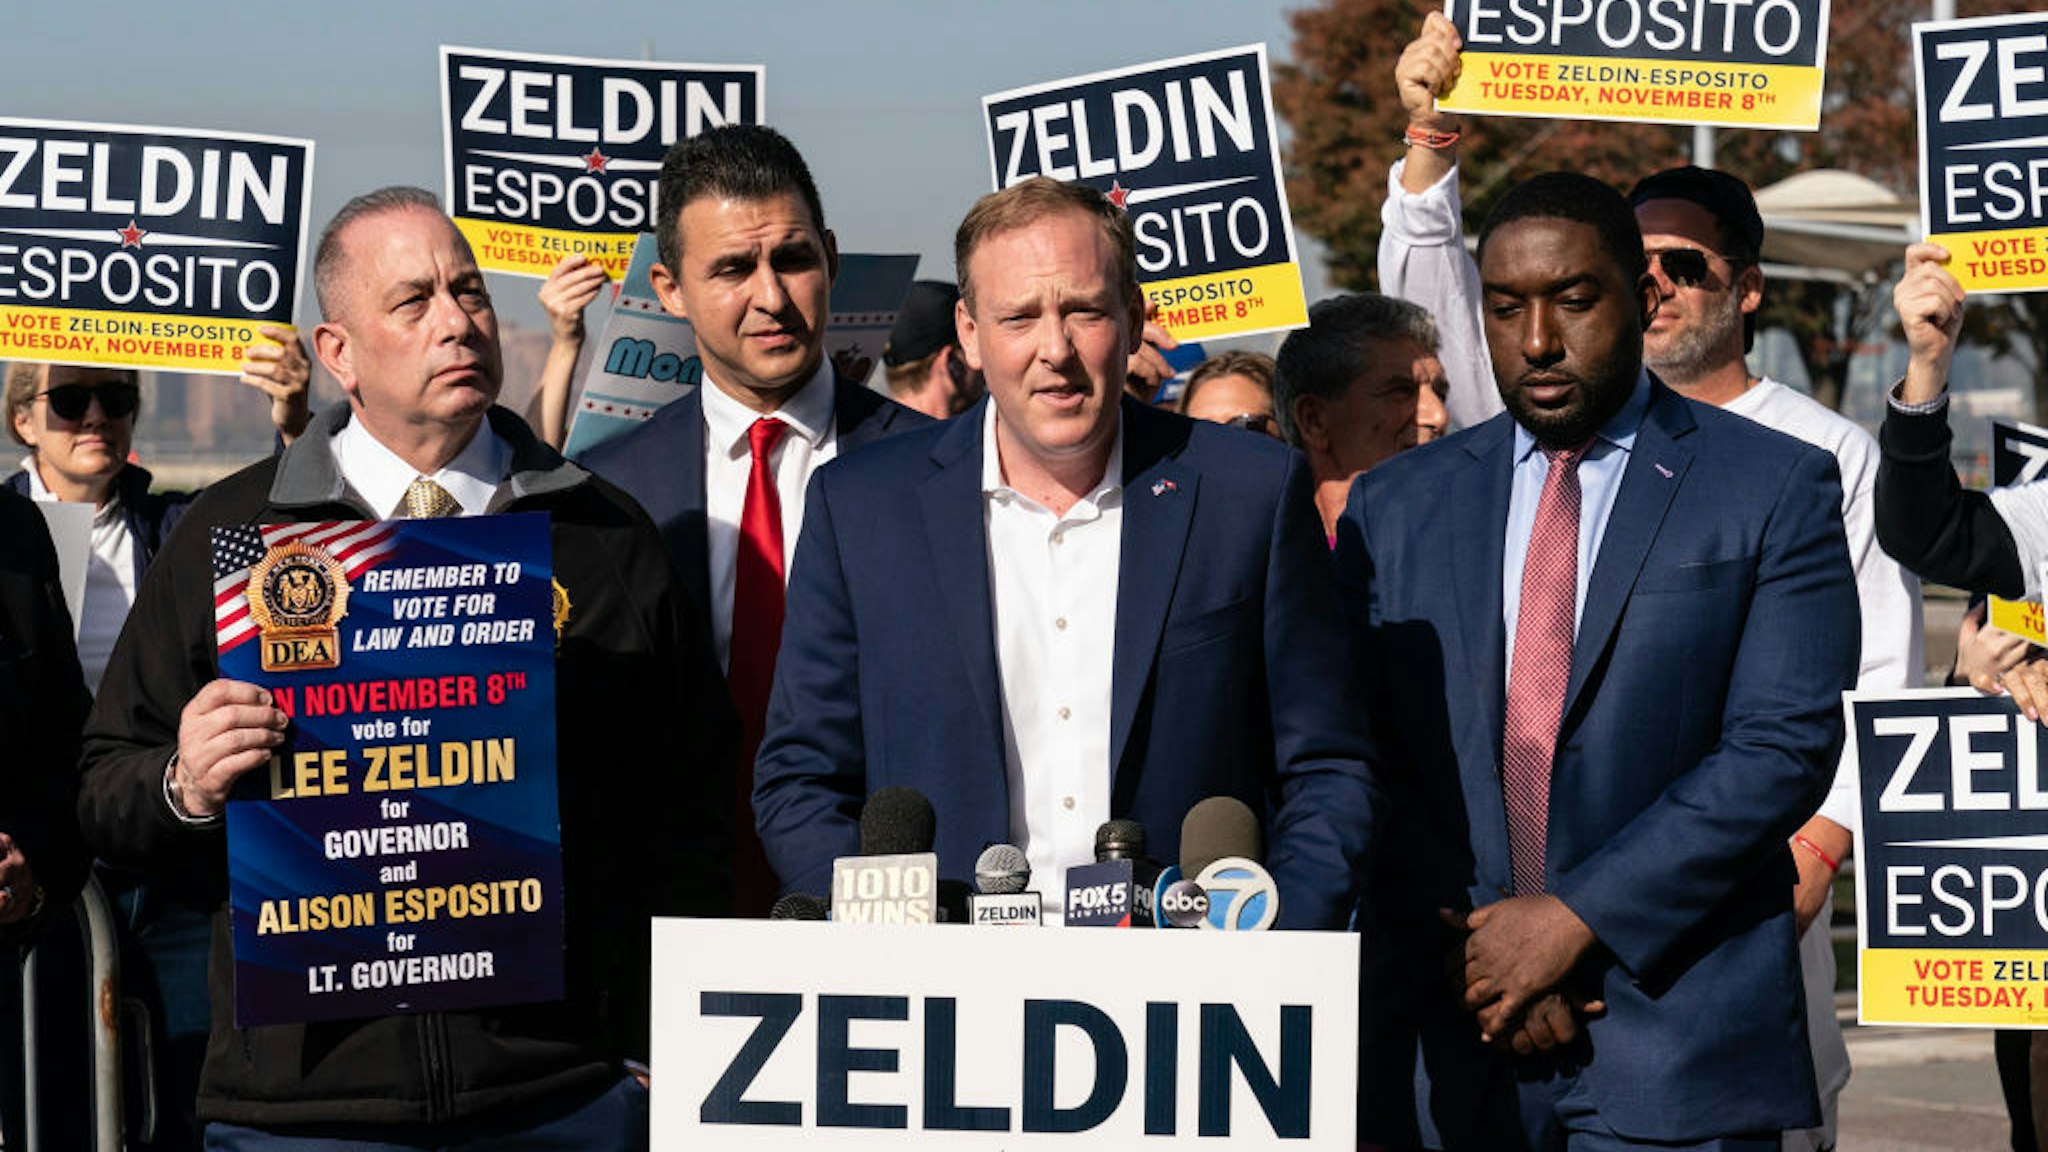 NEW YORK, UNITED STATES - 2022/11/04: Republican candidate for New York Governor Lee Zeldin (C) speaks at a campaign event addressing crimes against women at Pier 45. Zeldin was surrounded by supporters and faced some protesters who shamed him for exploiting the tragedy of a woman raped in that location for political gains. New York police announced that the perpetrator had been arrested. (Photo by Lev Radin/Pacific Press/LightRocket via Getty Images)